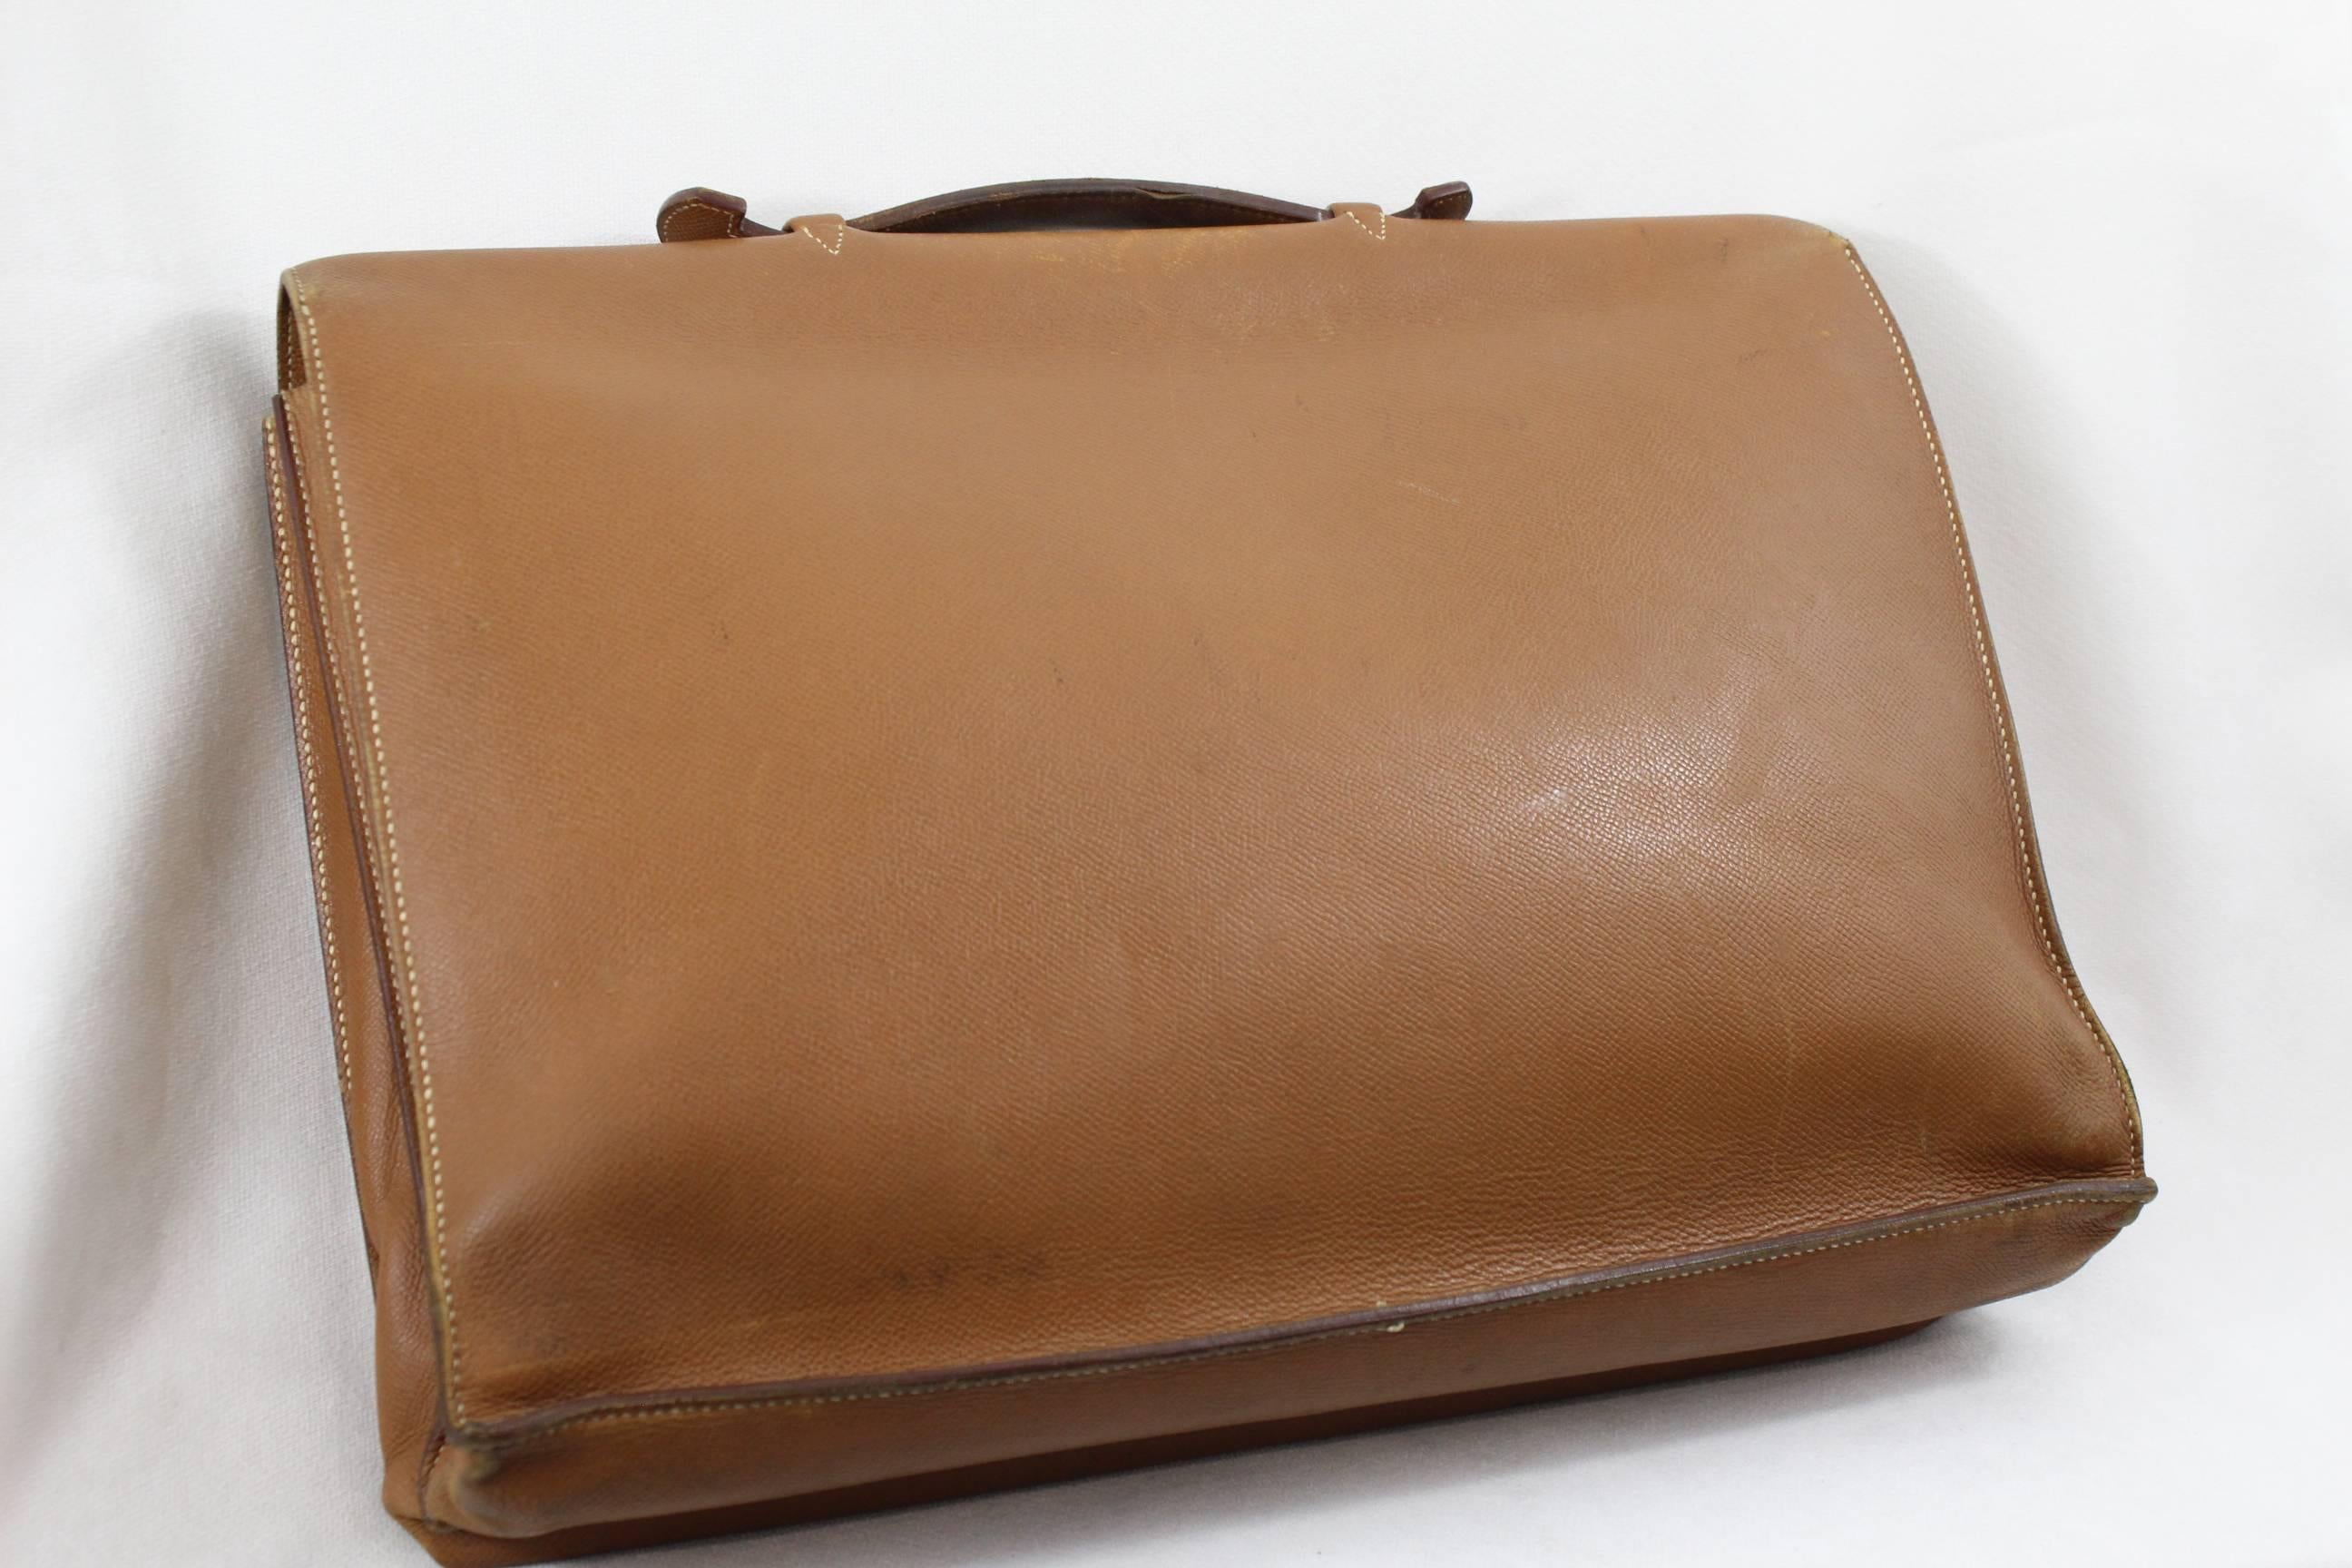 Brown Hermes Vintage Sac a Depeches Briefcase in golden graned leather